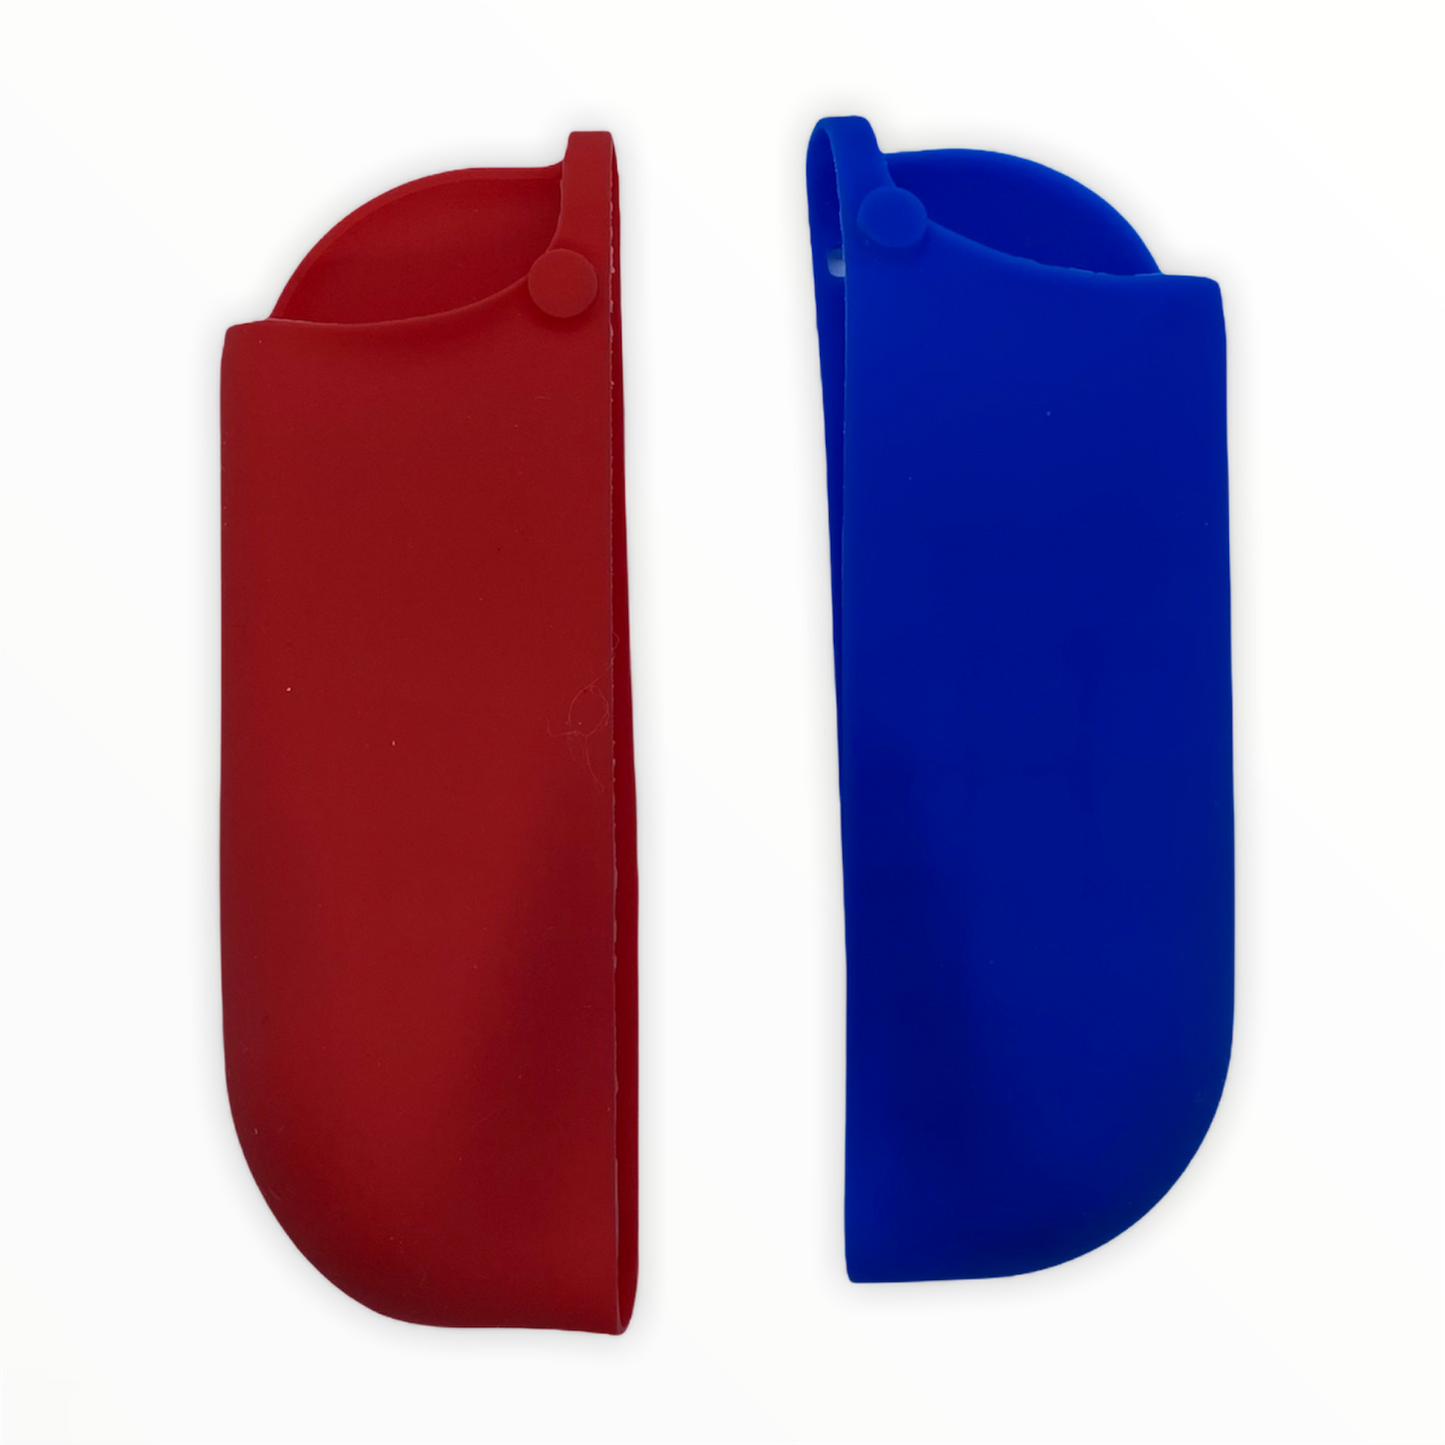 JenDore Blue & Red Silicone Nintendo Switch Joy-con Protective Shell Covers